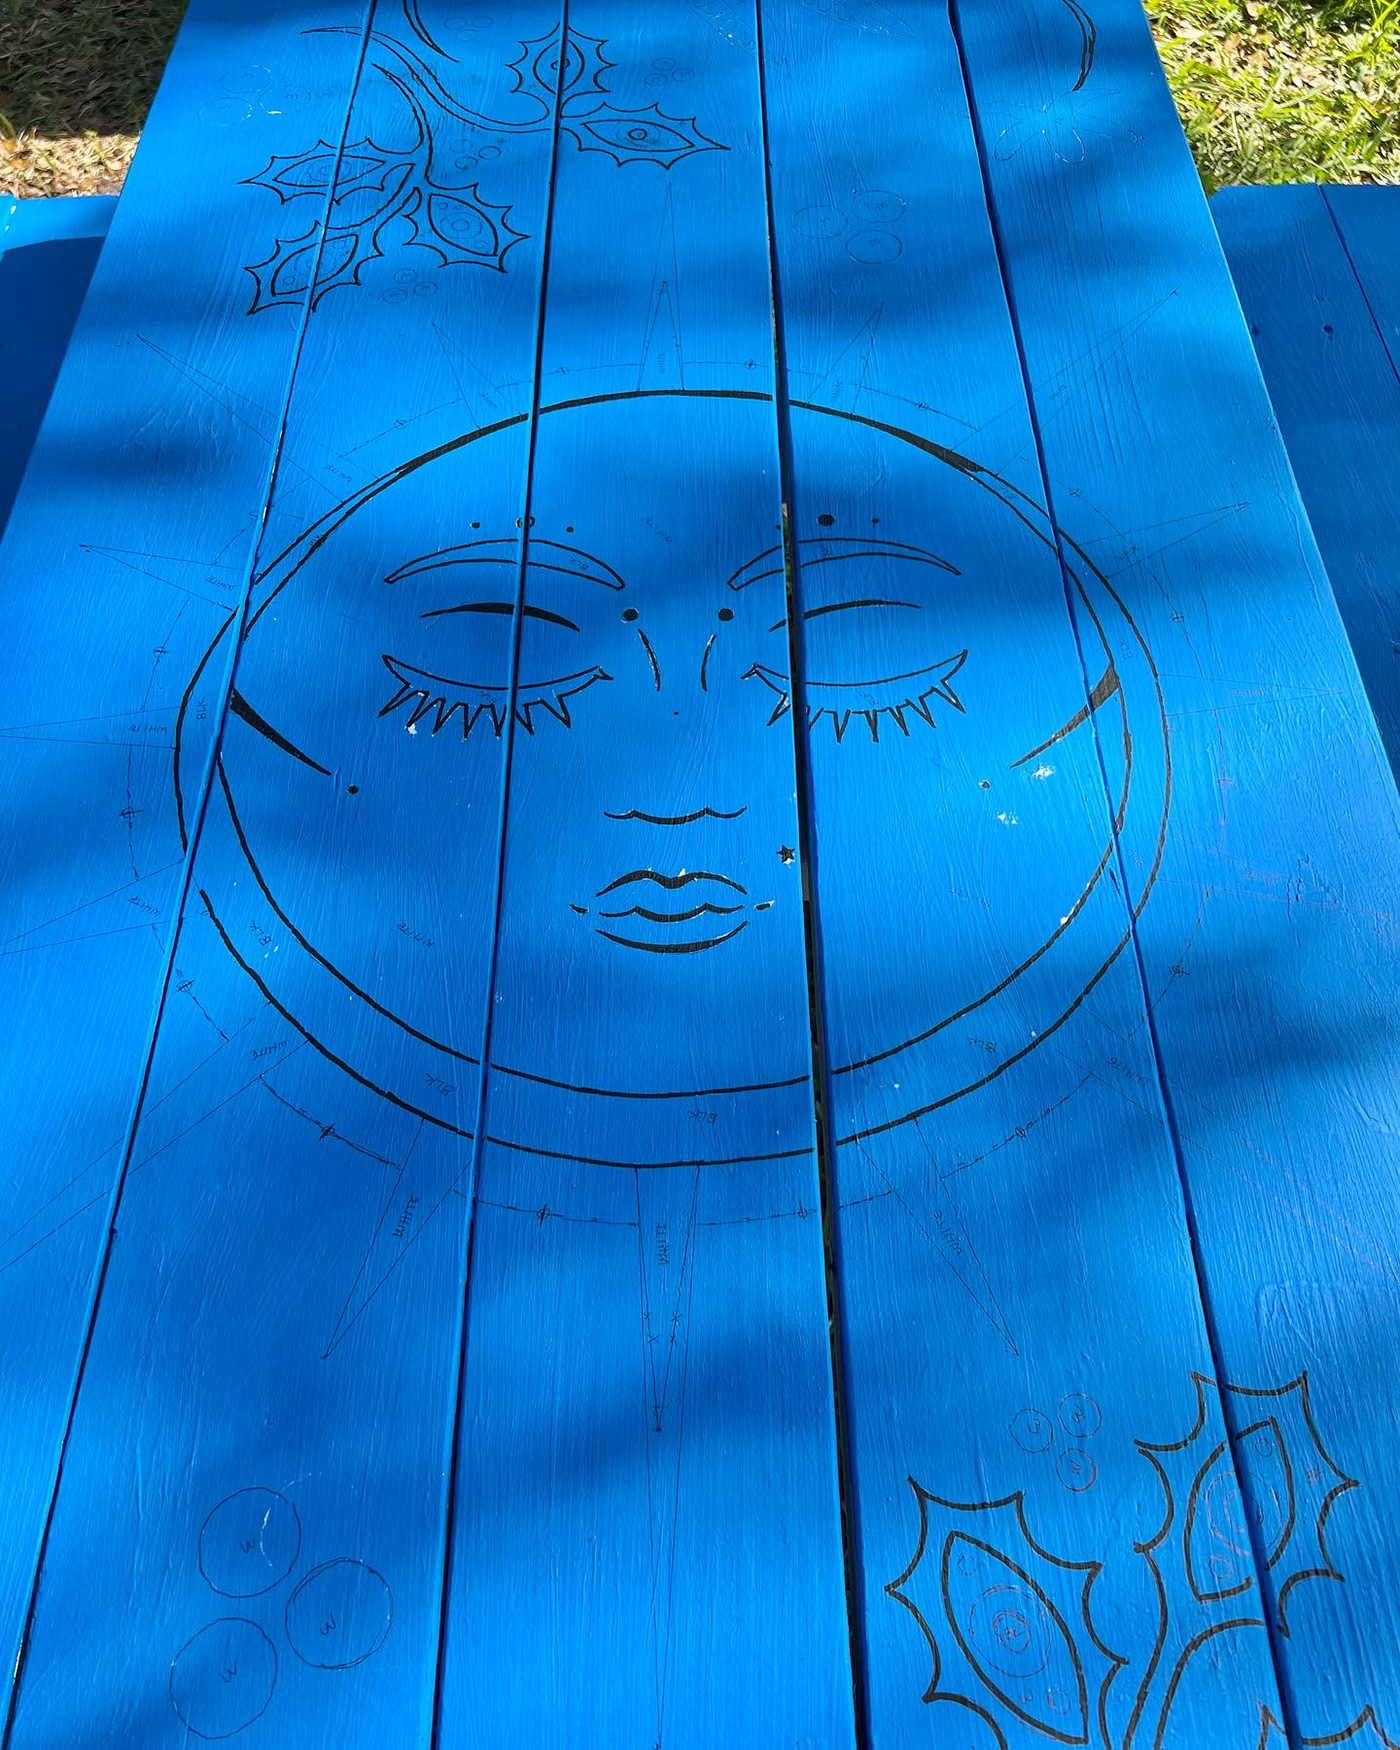 public art painting   Picnic Table Mural protection community blue